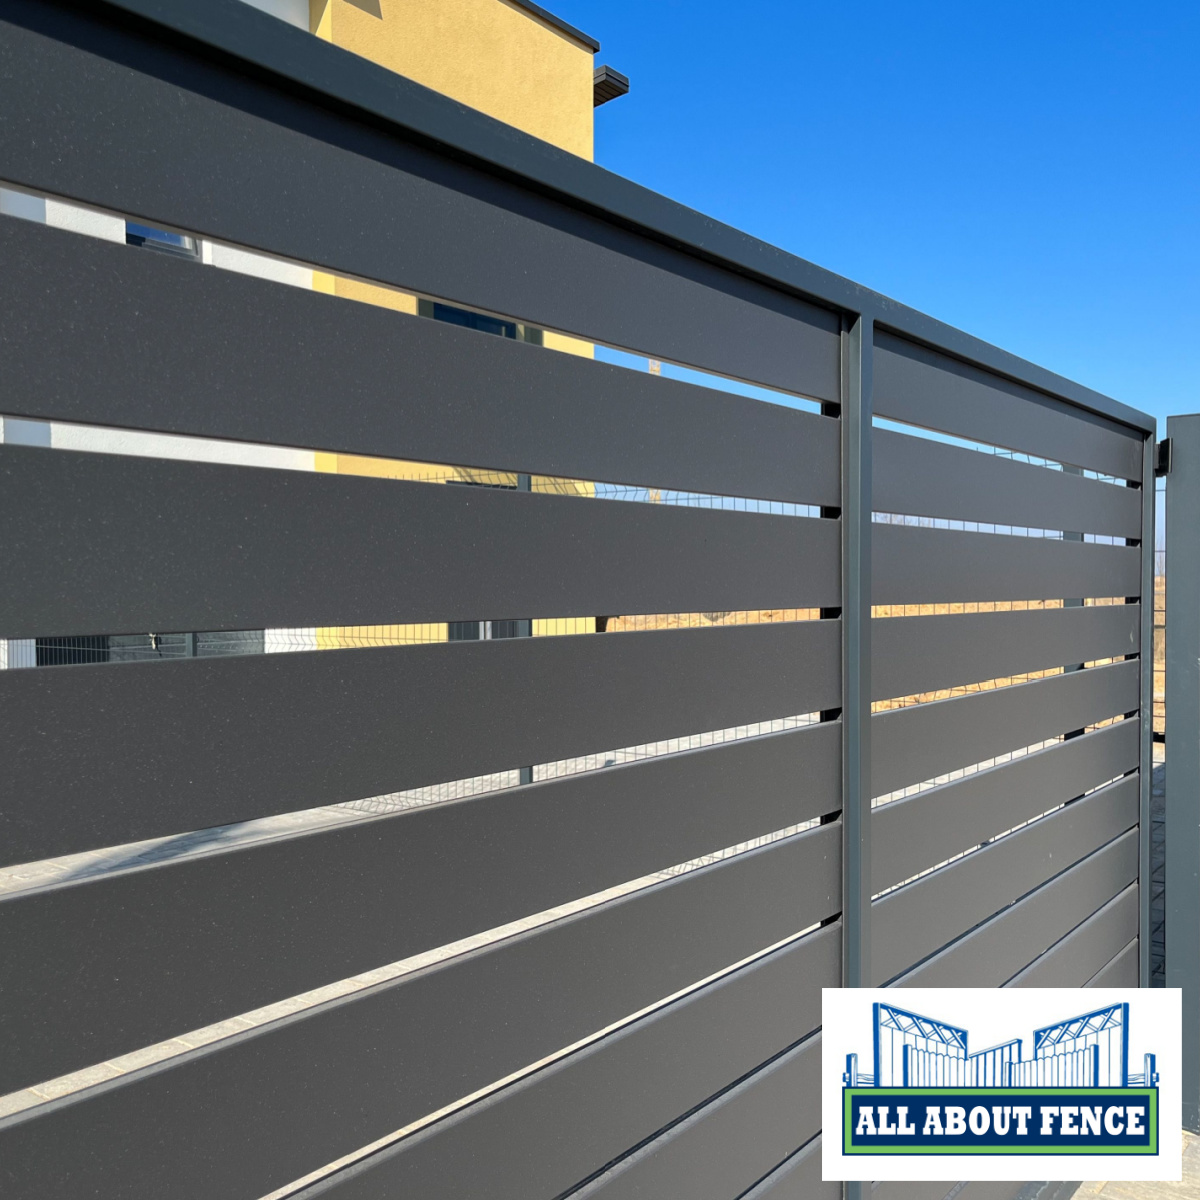 Are You Up On The Latest Residential Fencing Trends?